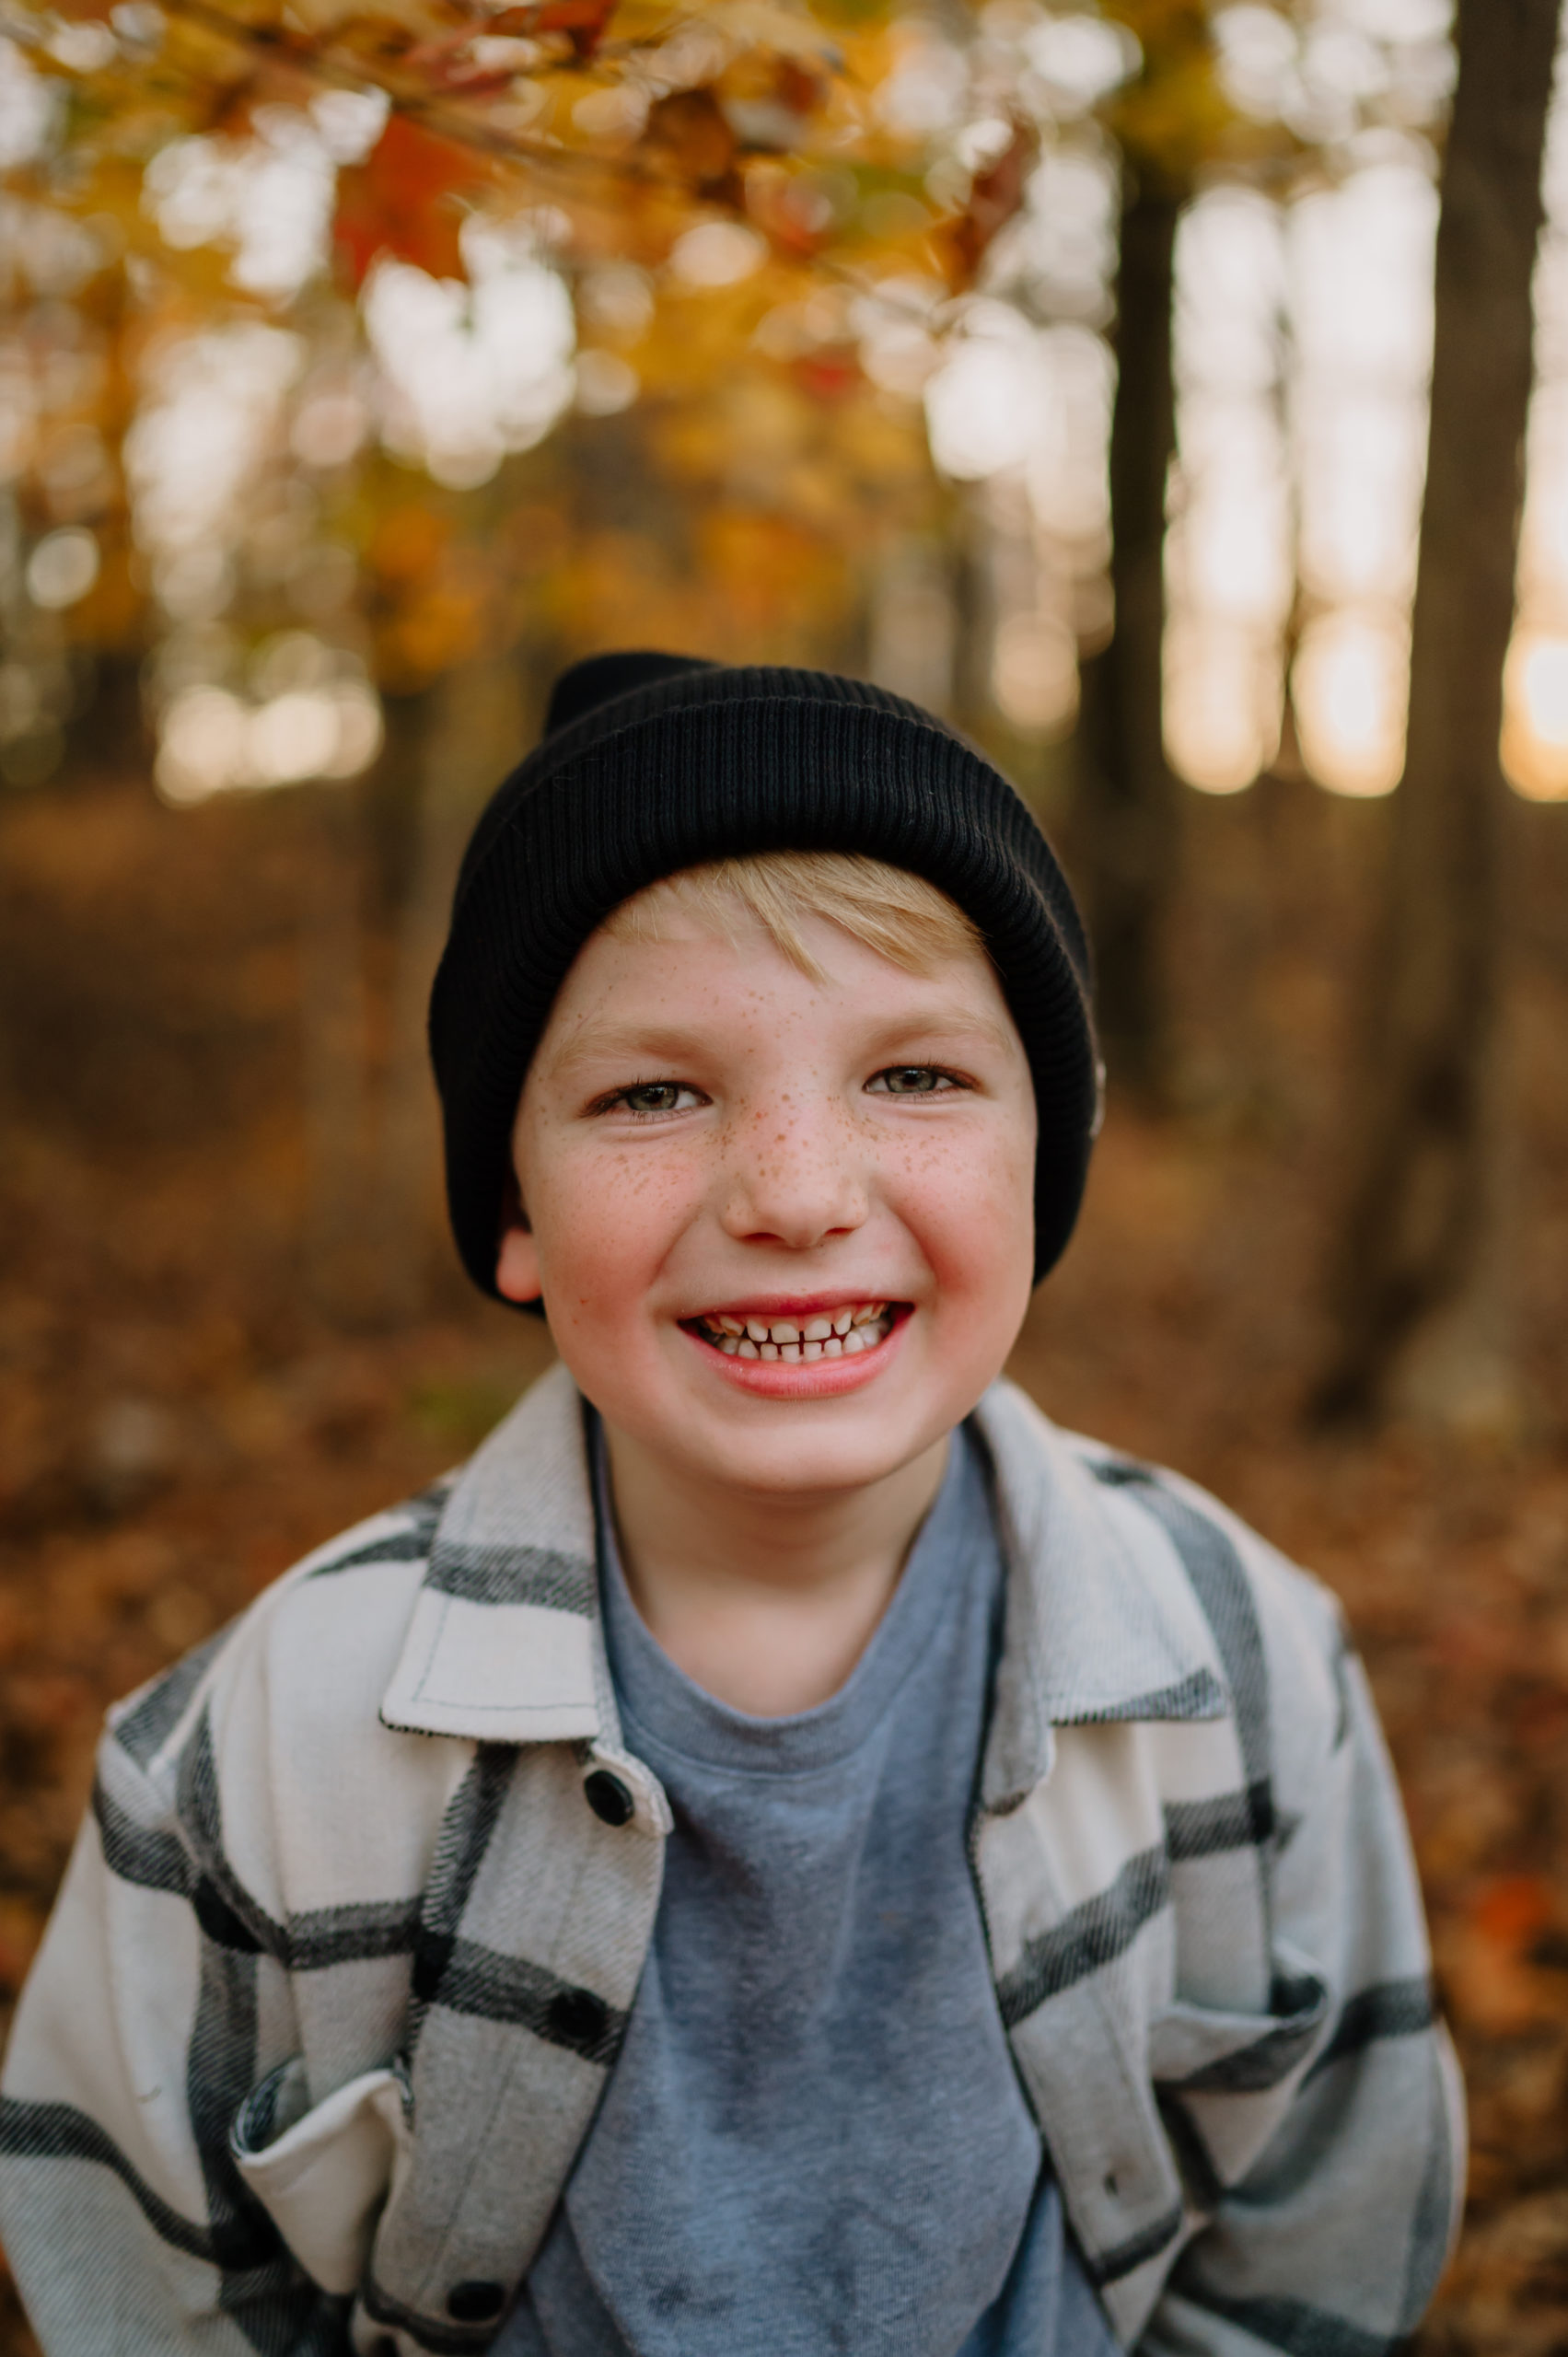 Boy with a hat on smiling